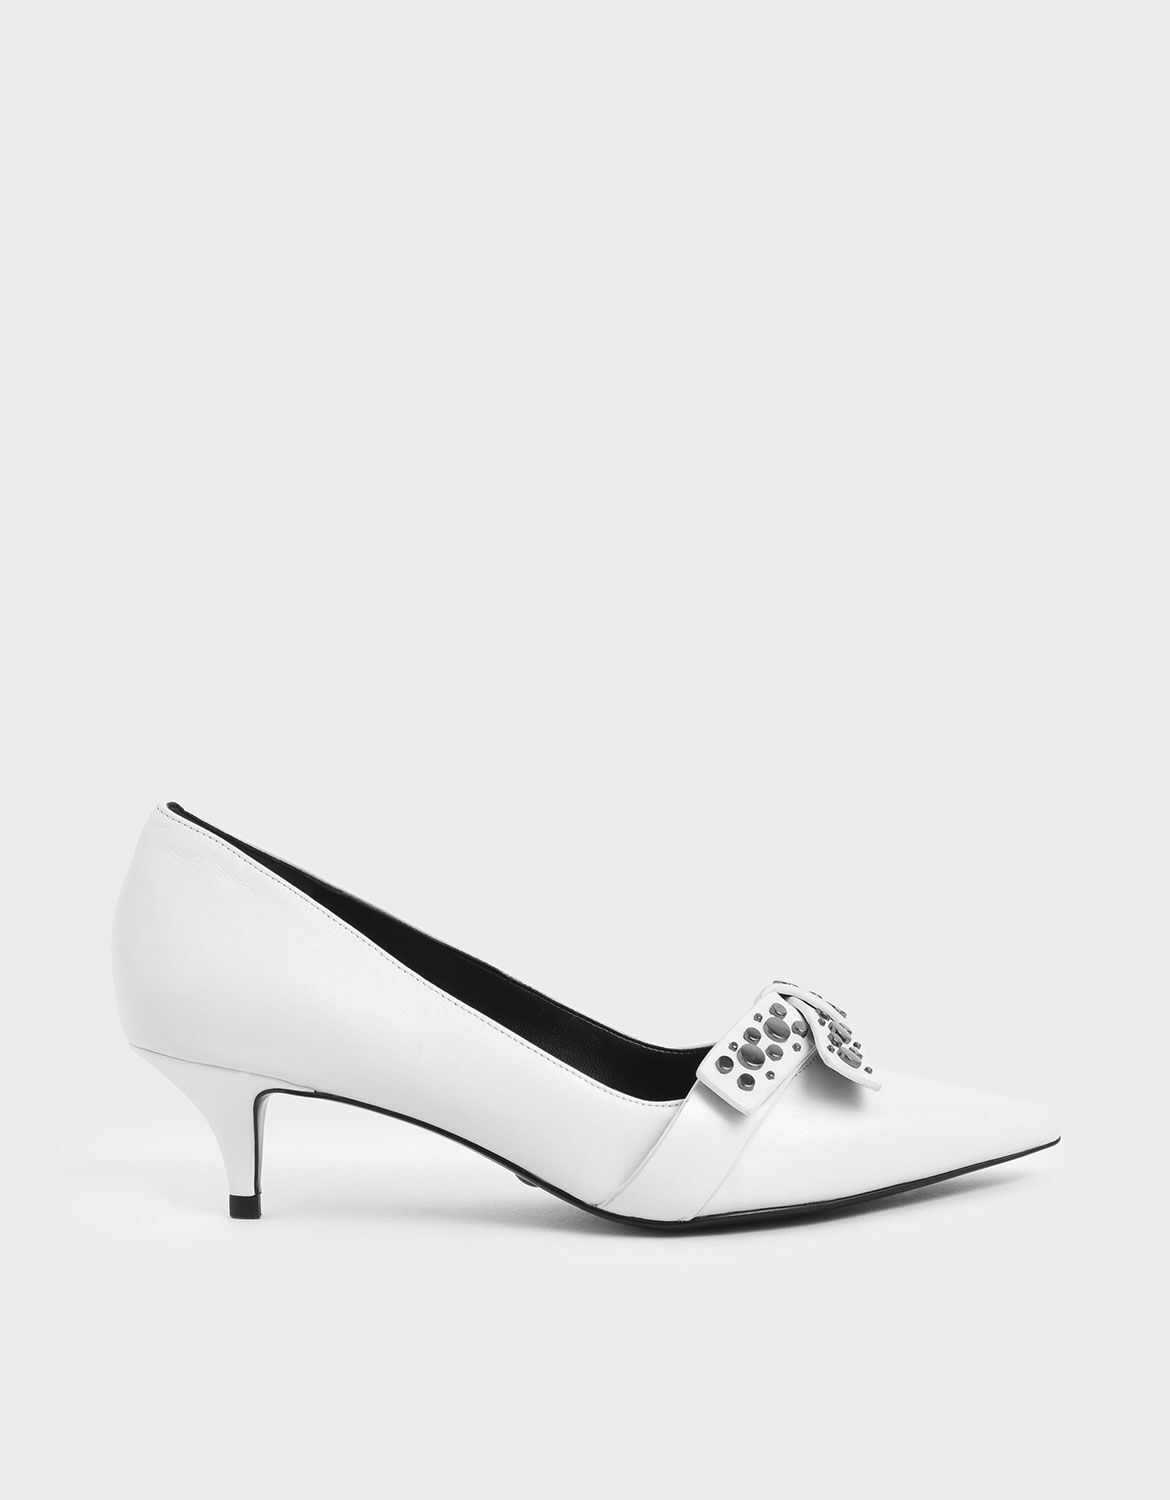 white leather pumps uk